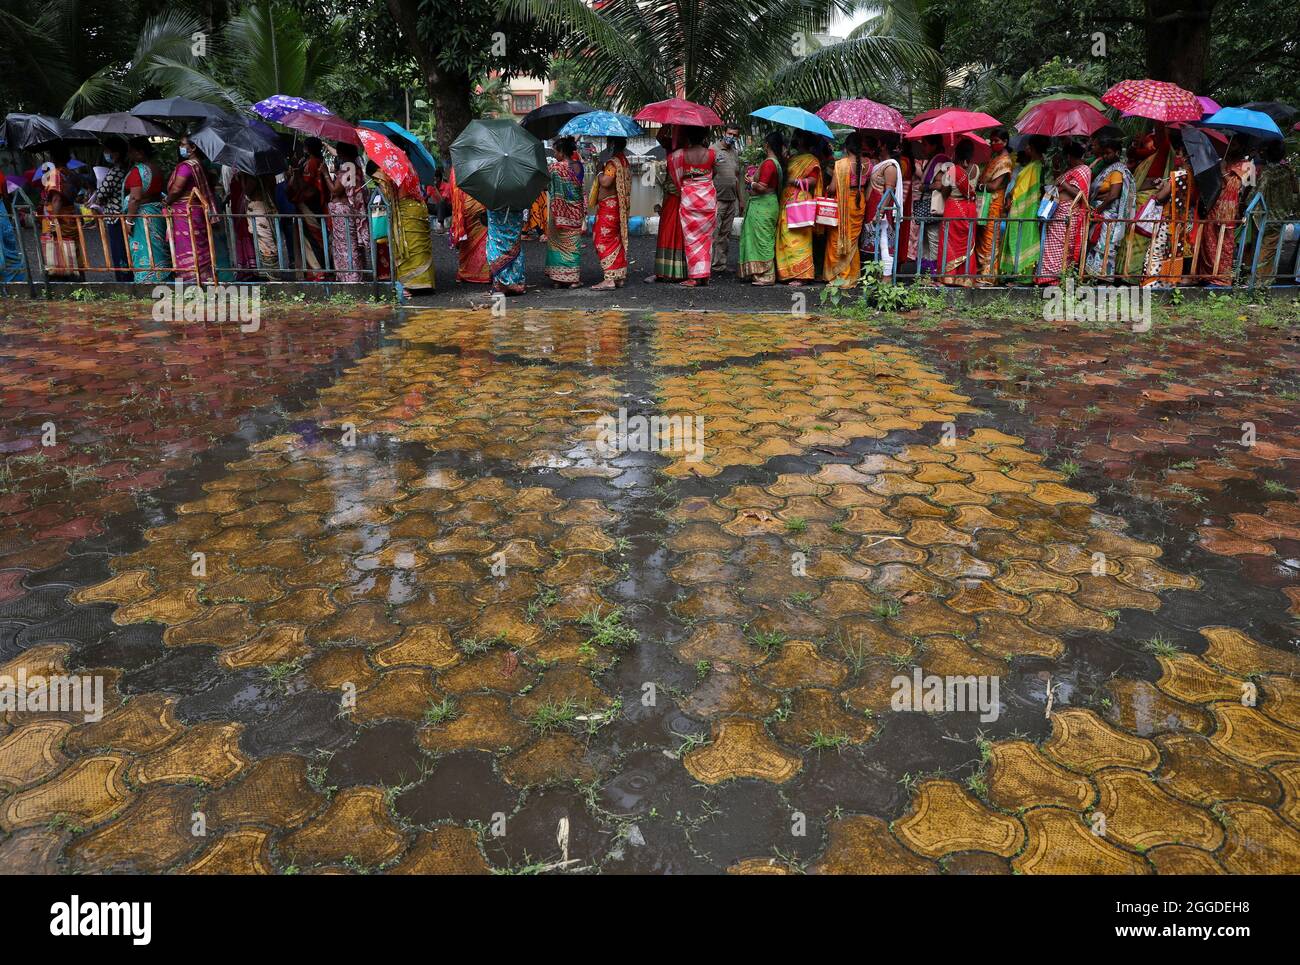 Women hold umbrellas to cover from rain as they wait to receive a dose of COVISHIELD vaccine, a coronavirus disease (COVID-19) vaccine manufactured by Serum Institute of India, outside a vaccination centre in Kolkata, India, August 31, 2021. REUTERS/Rupak De Chowdhuri Stock Photo